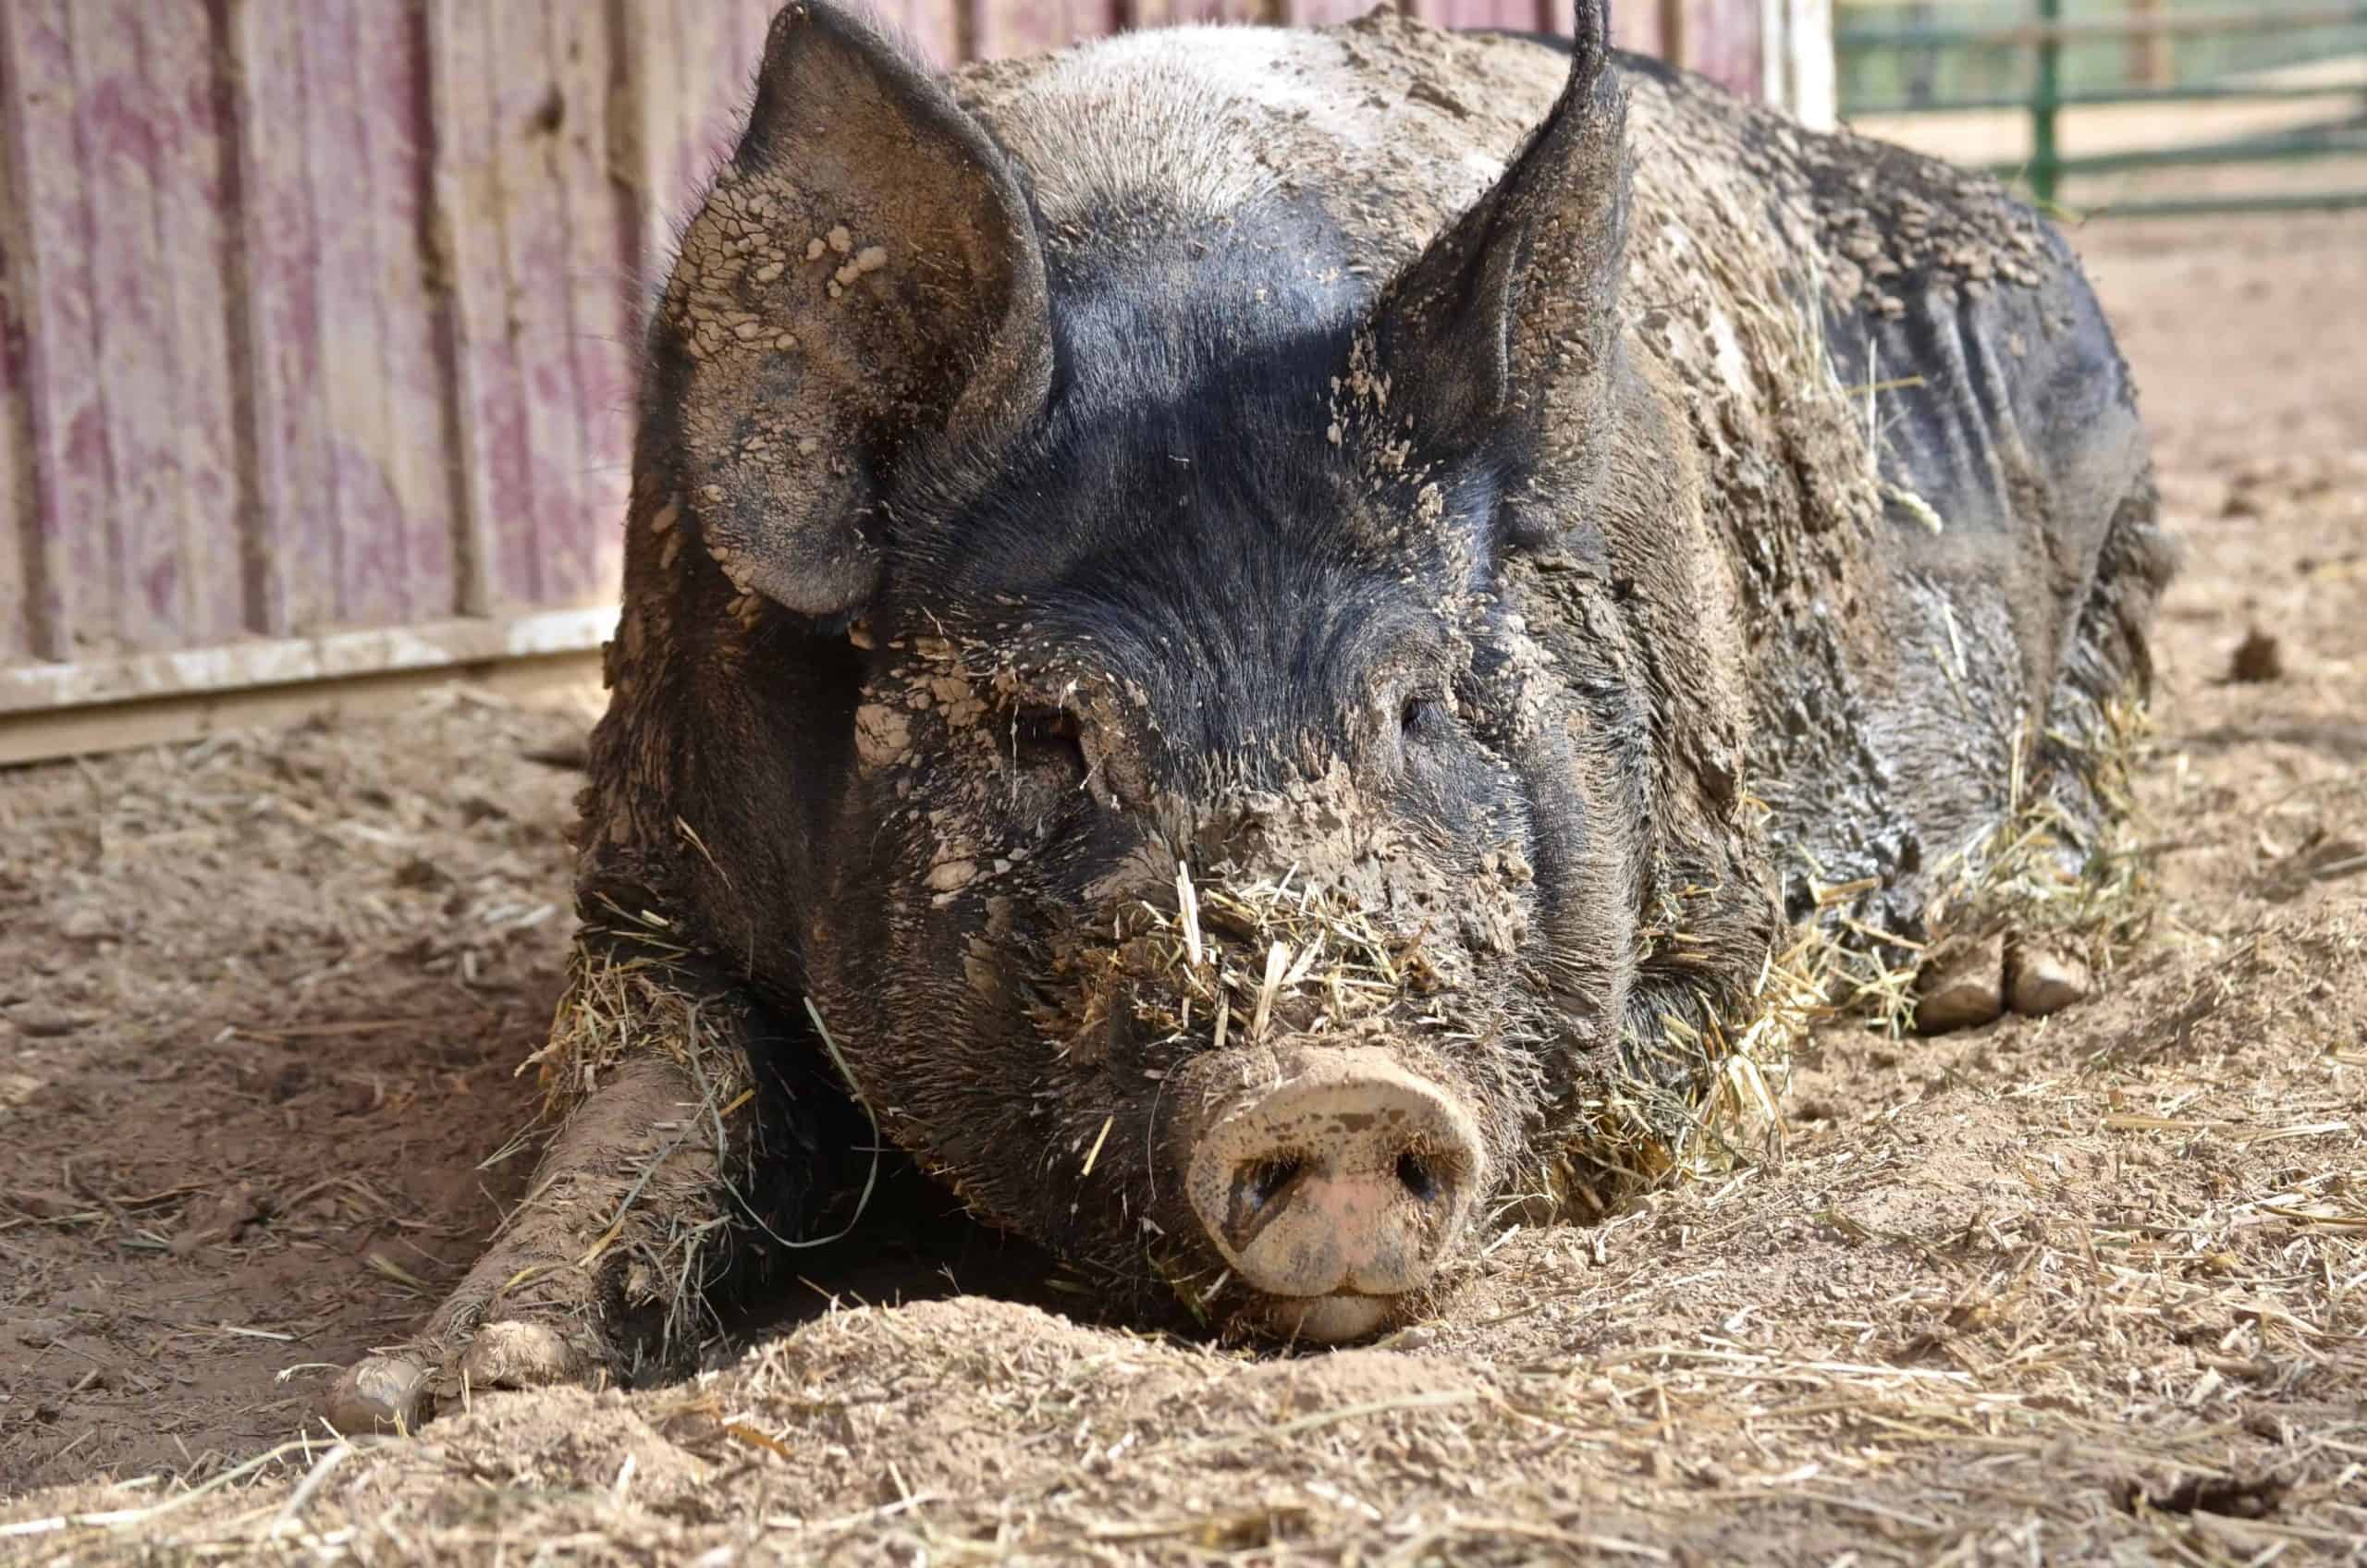 Creating A Good Home For Pigs - The Open Sanctuary Project